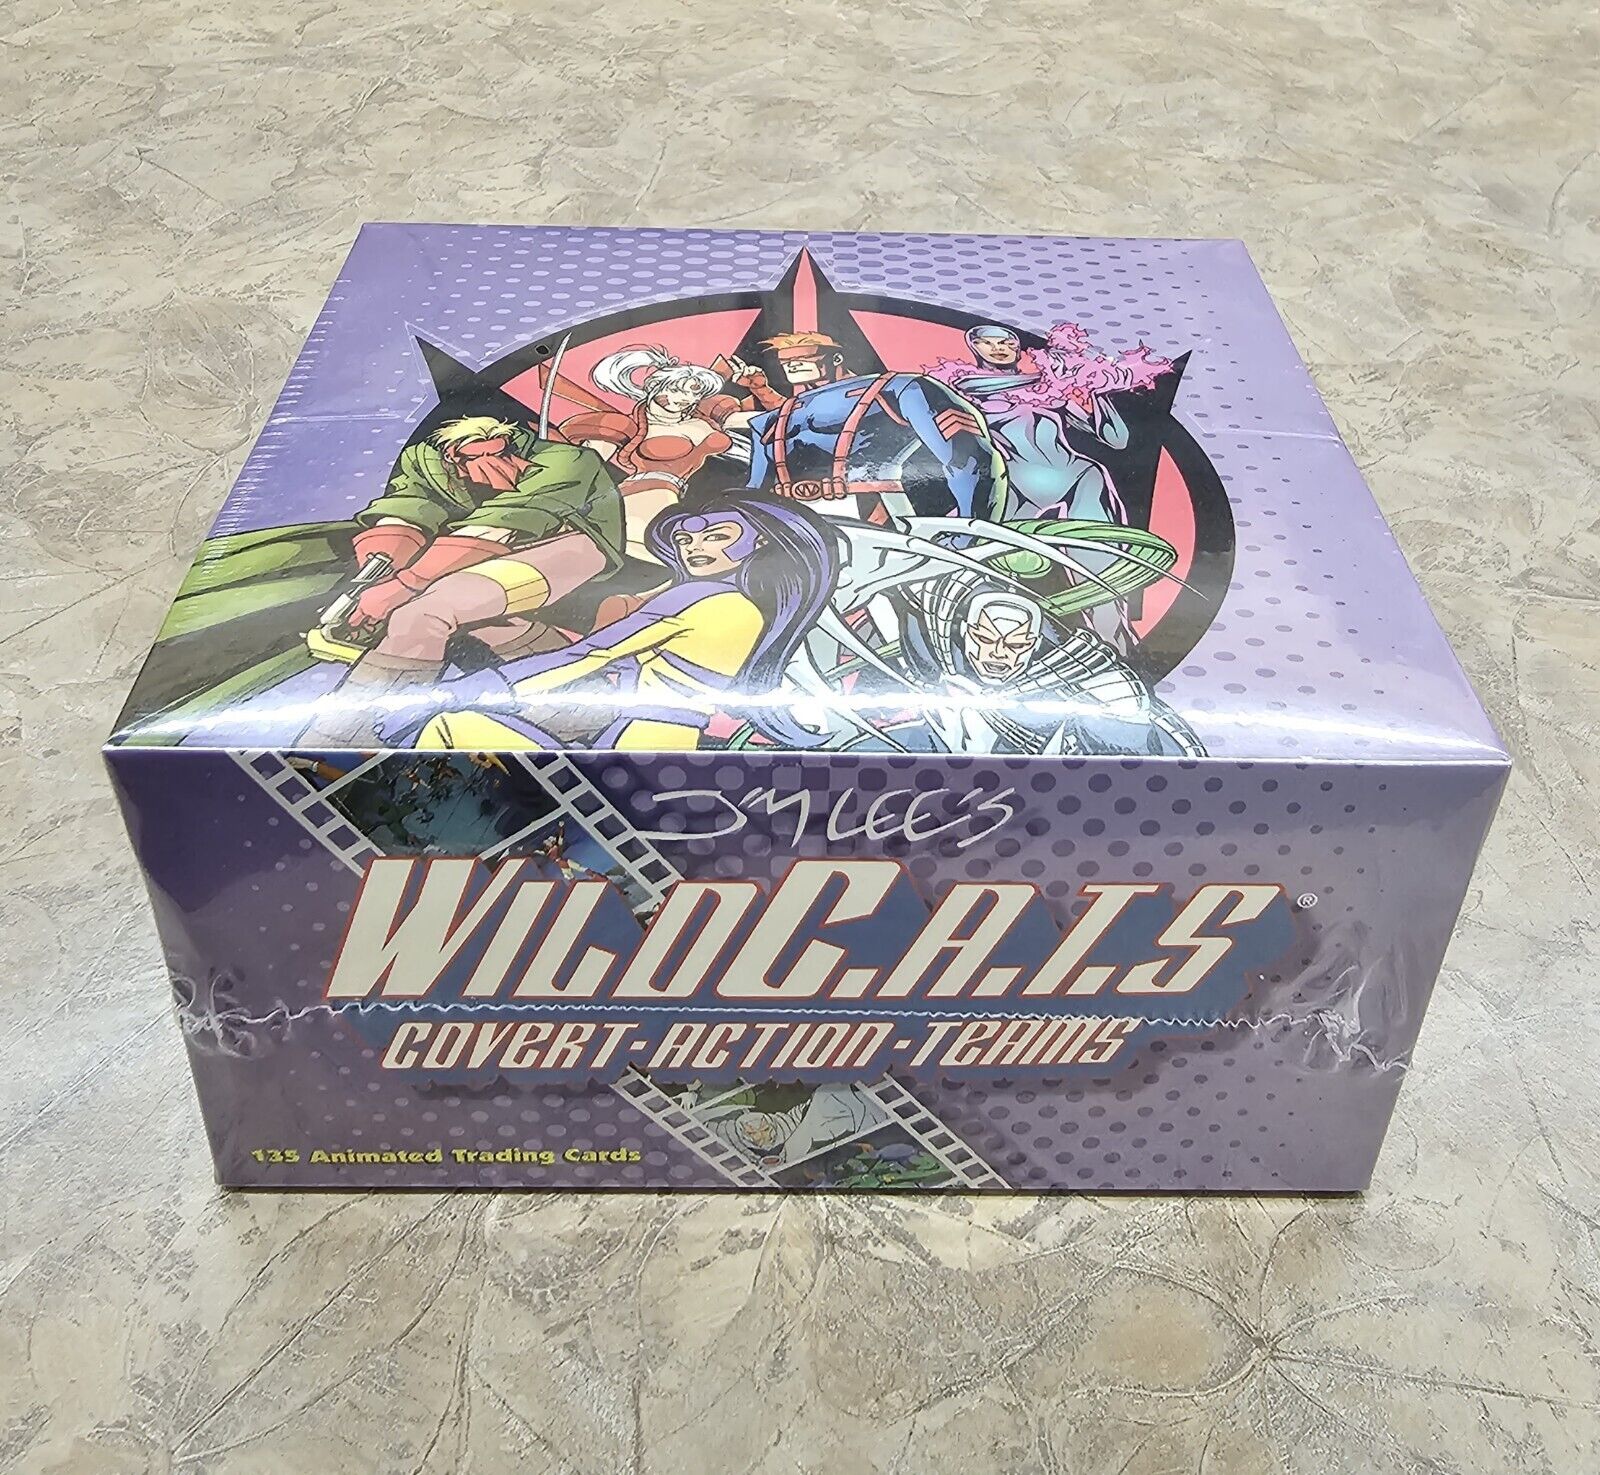 1995 Wildcats Covert Action Teams Factory Sealed Box JIM LEE'S